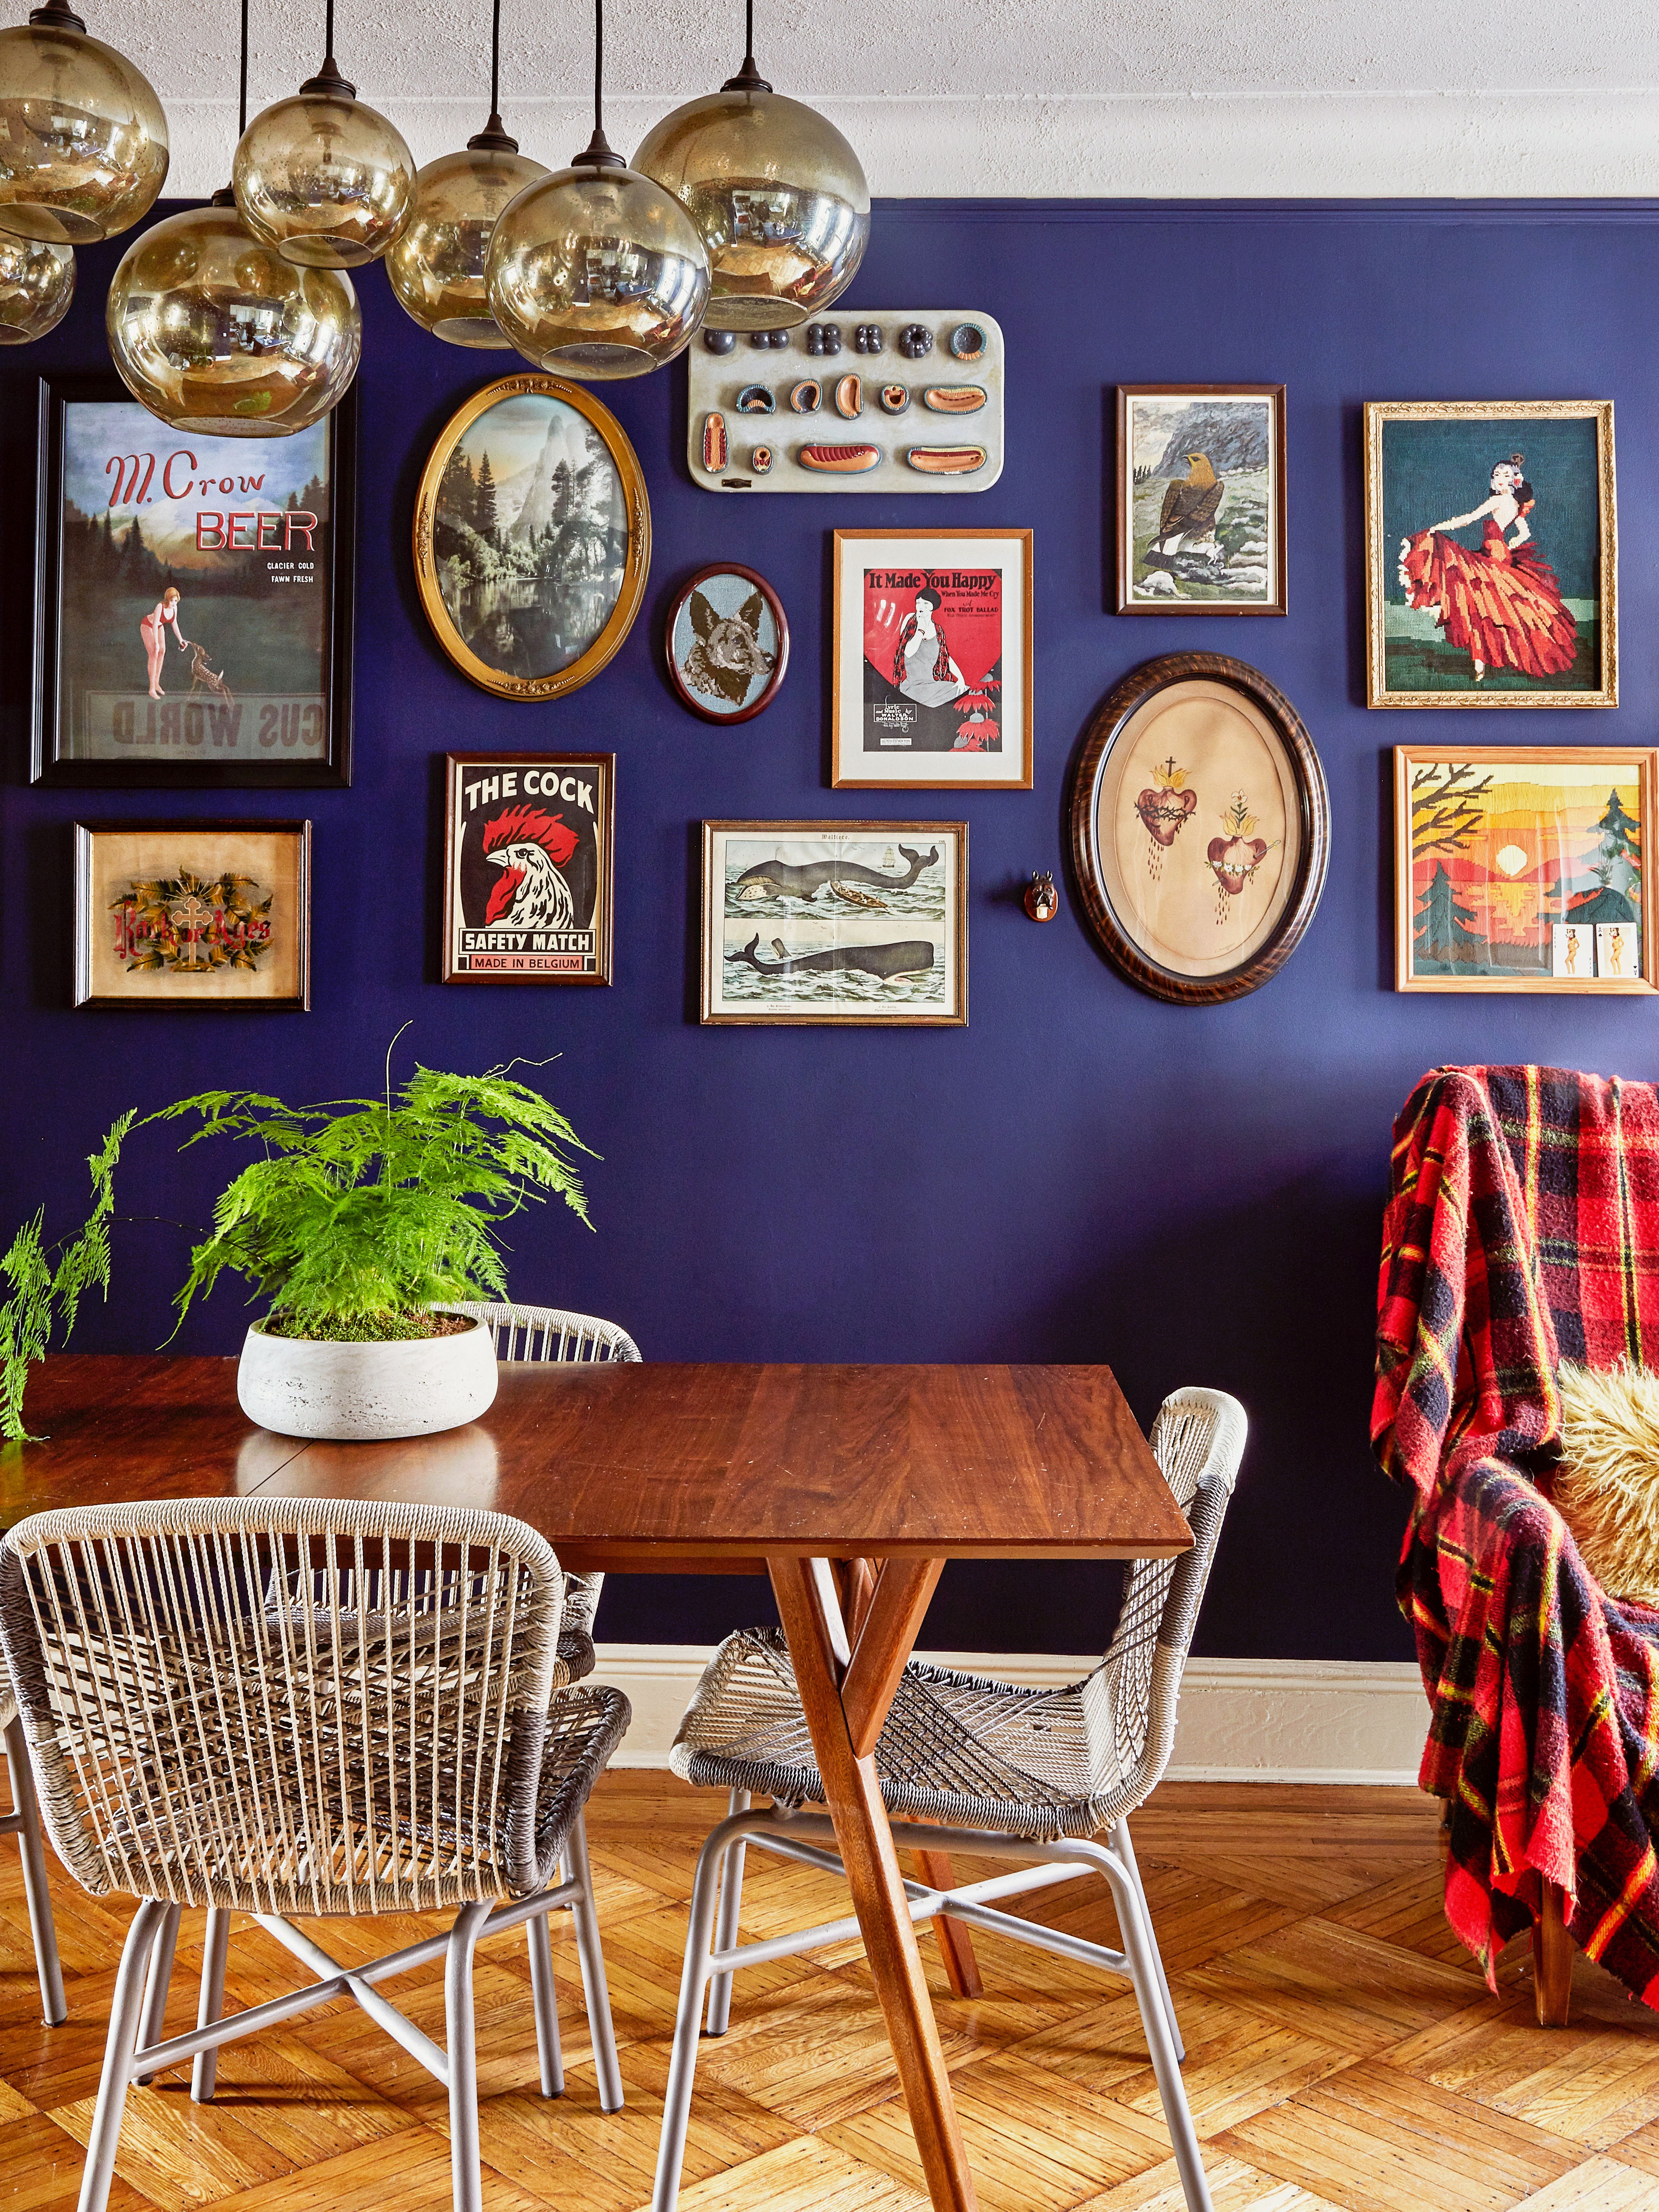 This Antique Lover’s Home Is a Master Class in Gallery Wall Curation